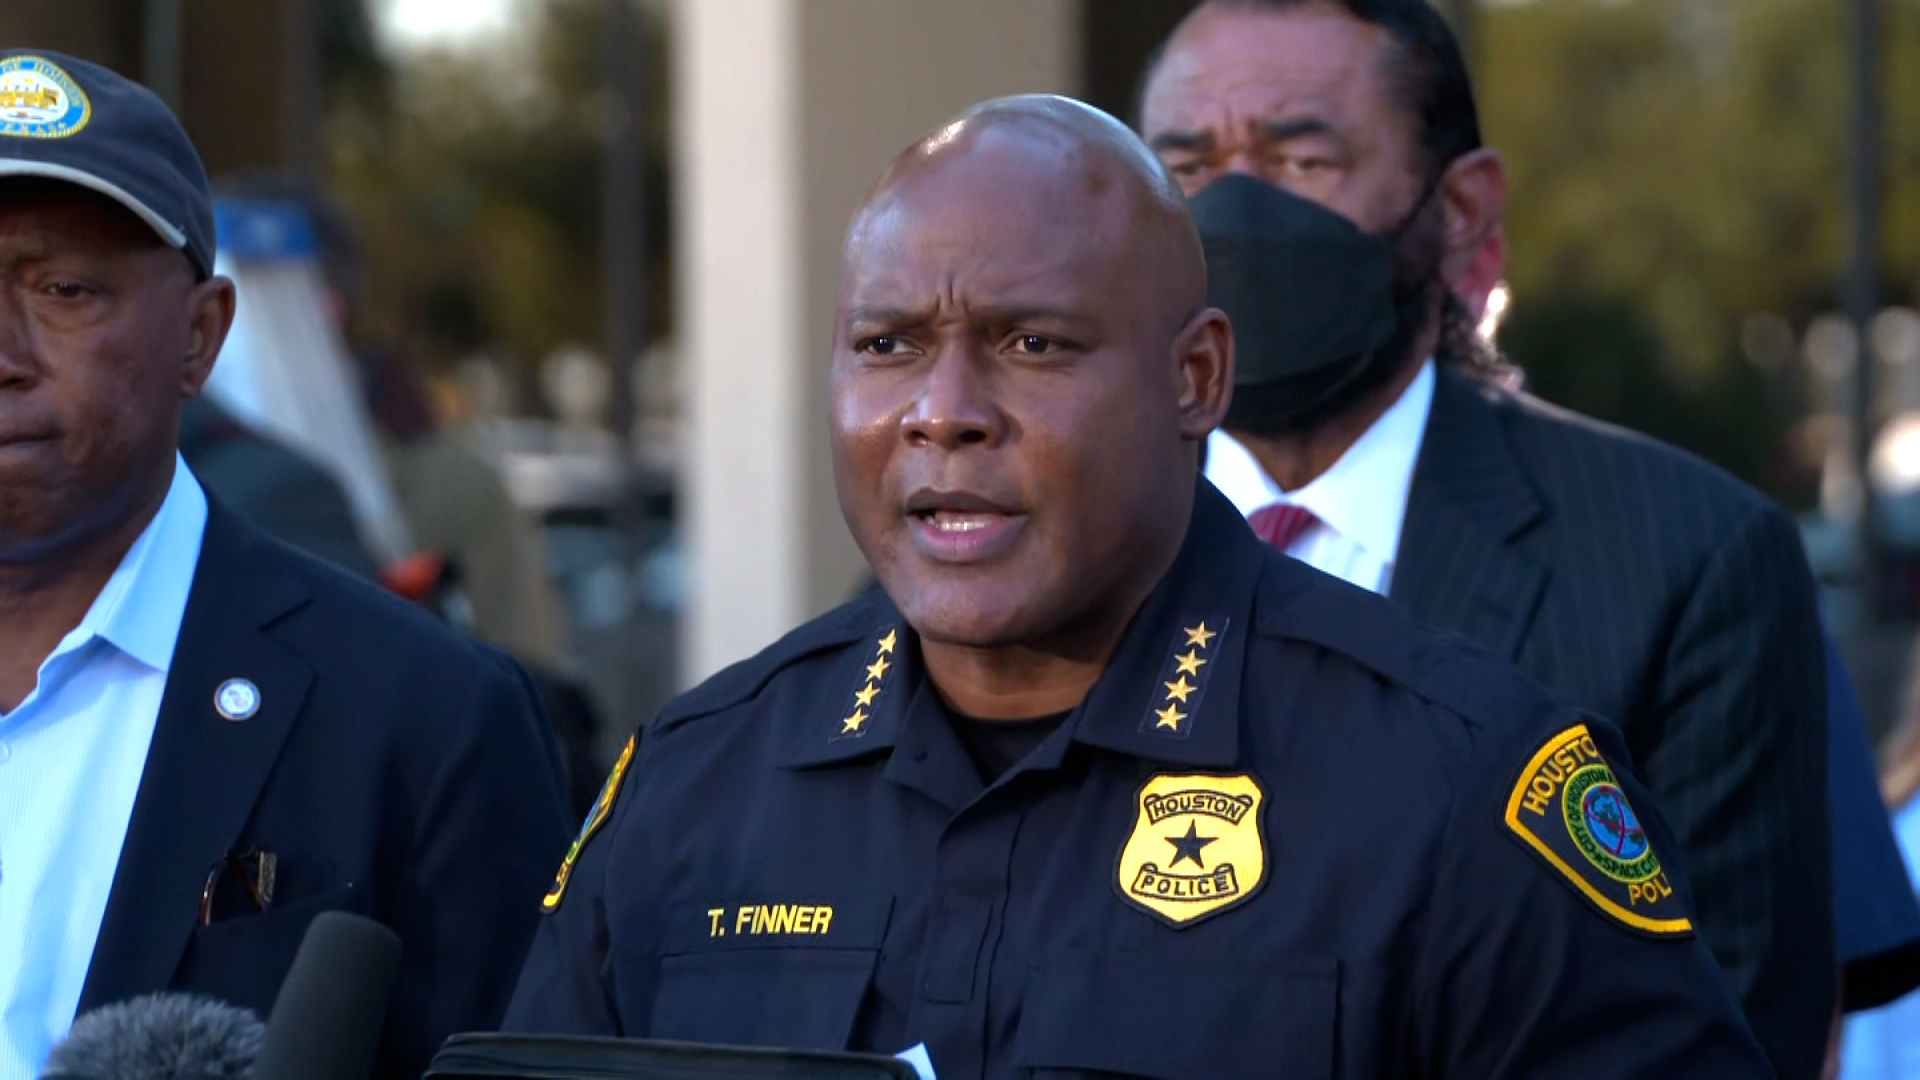 Houston Police Chief Troy Finner speaks during a press conference in Houston on November 6.